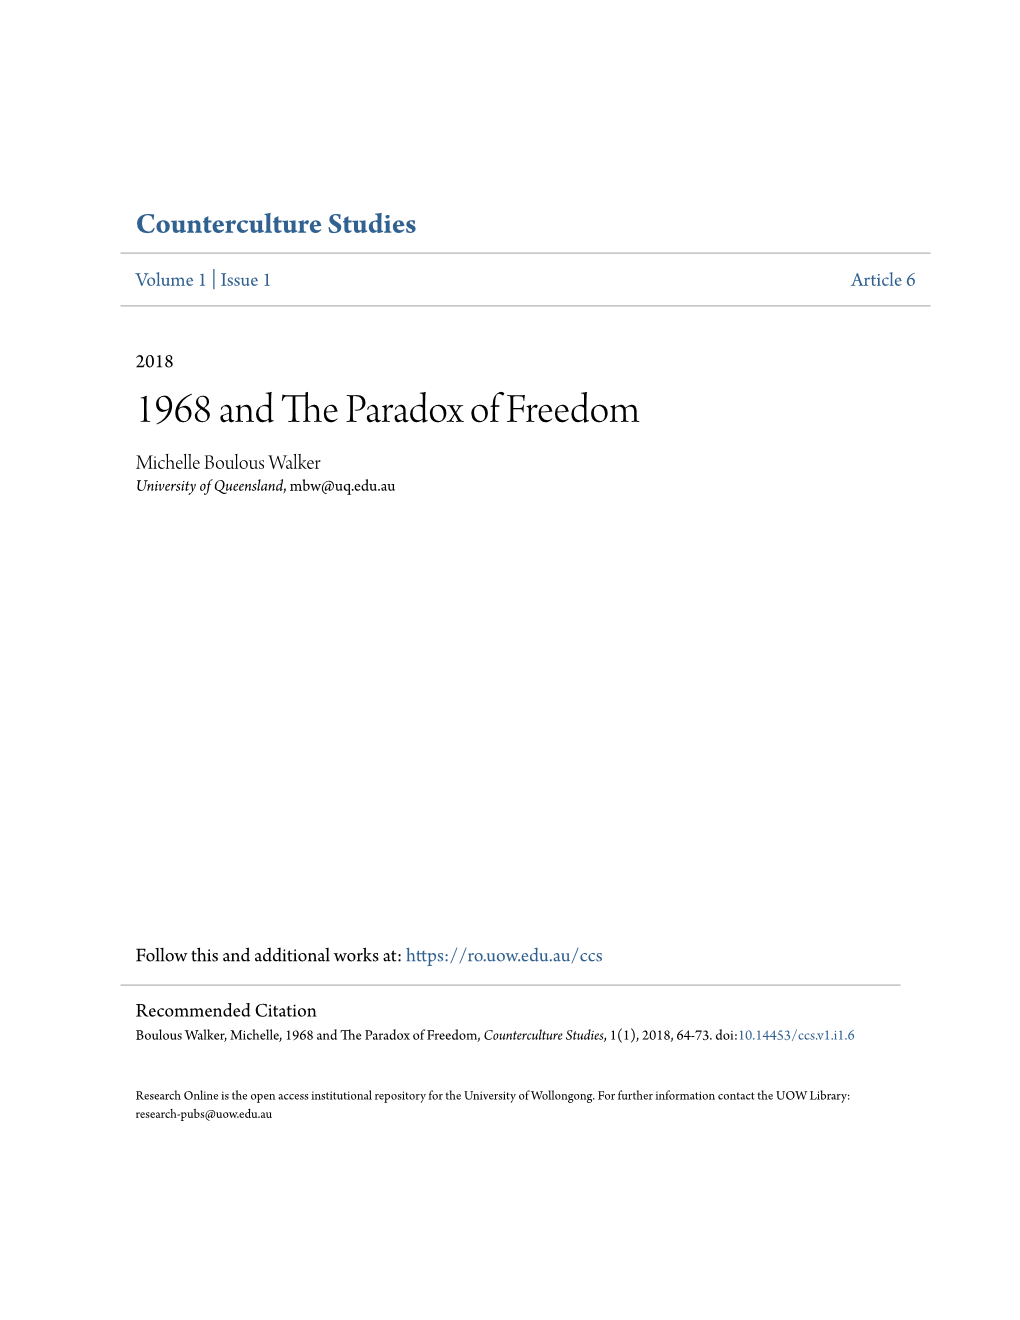 1968 and the Paradox of Freedom*